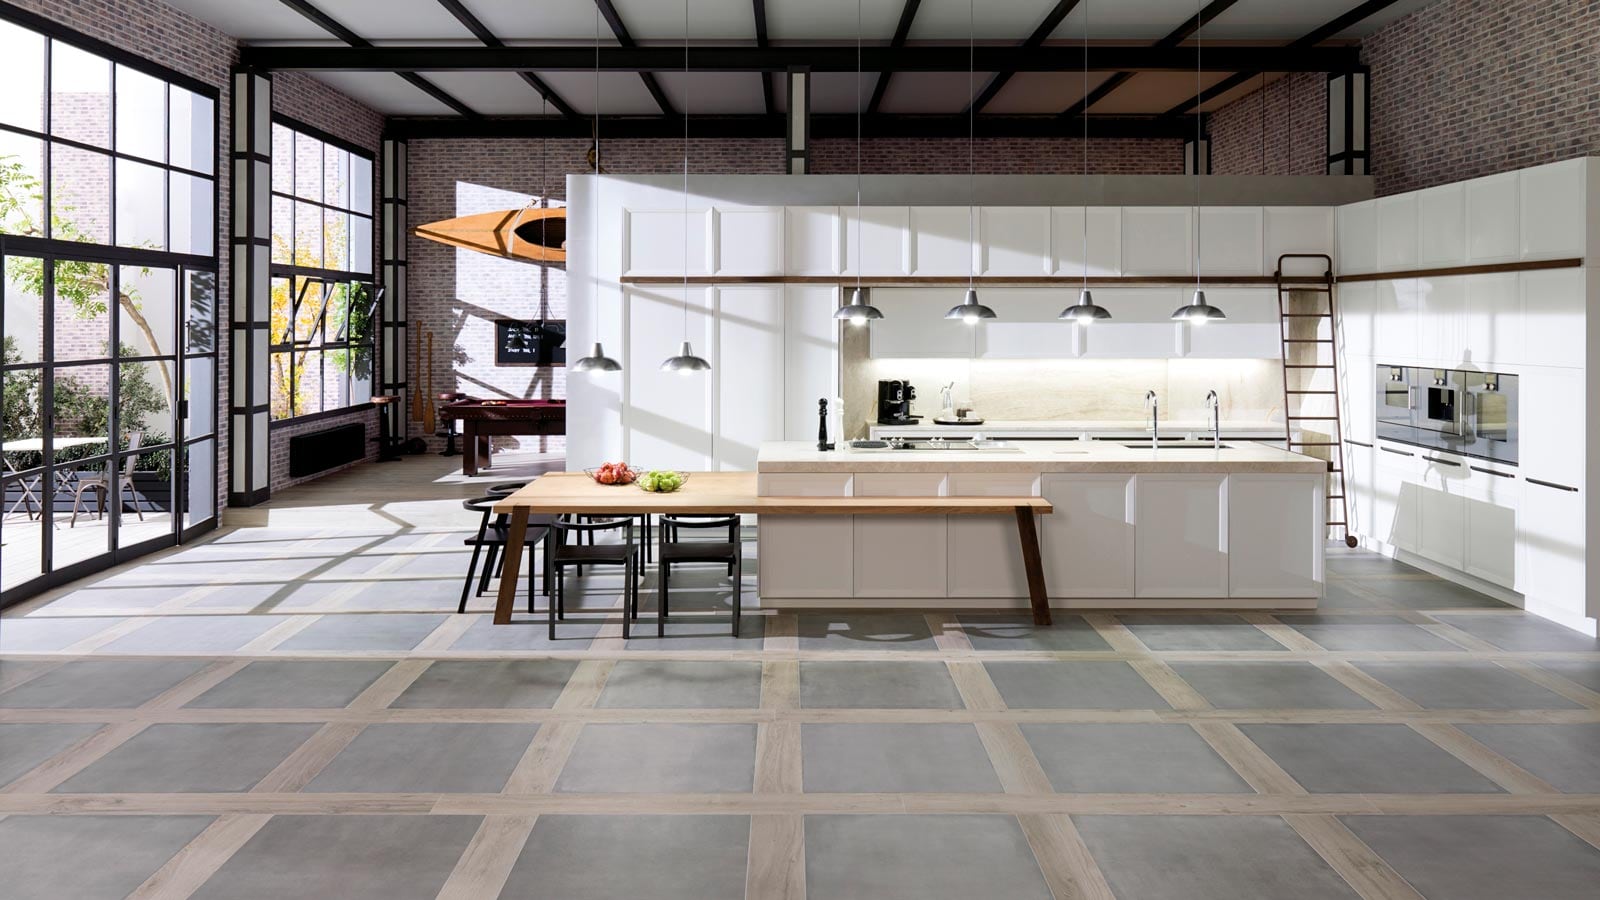 Kitchen flooring ideas: combining wood and ceramic tiles